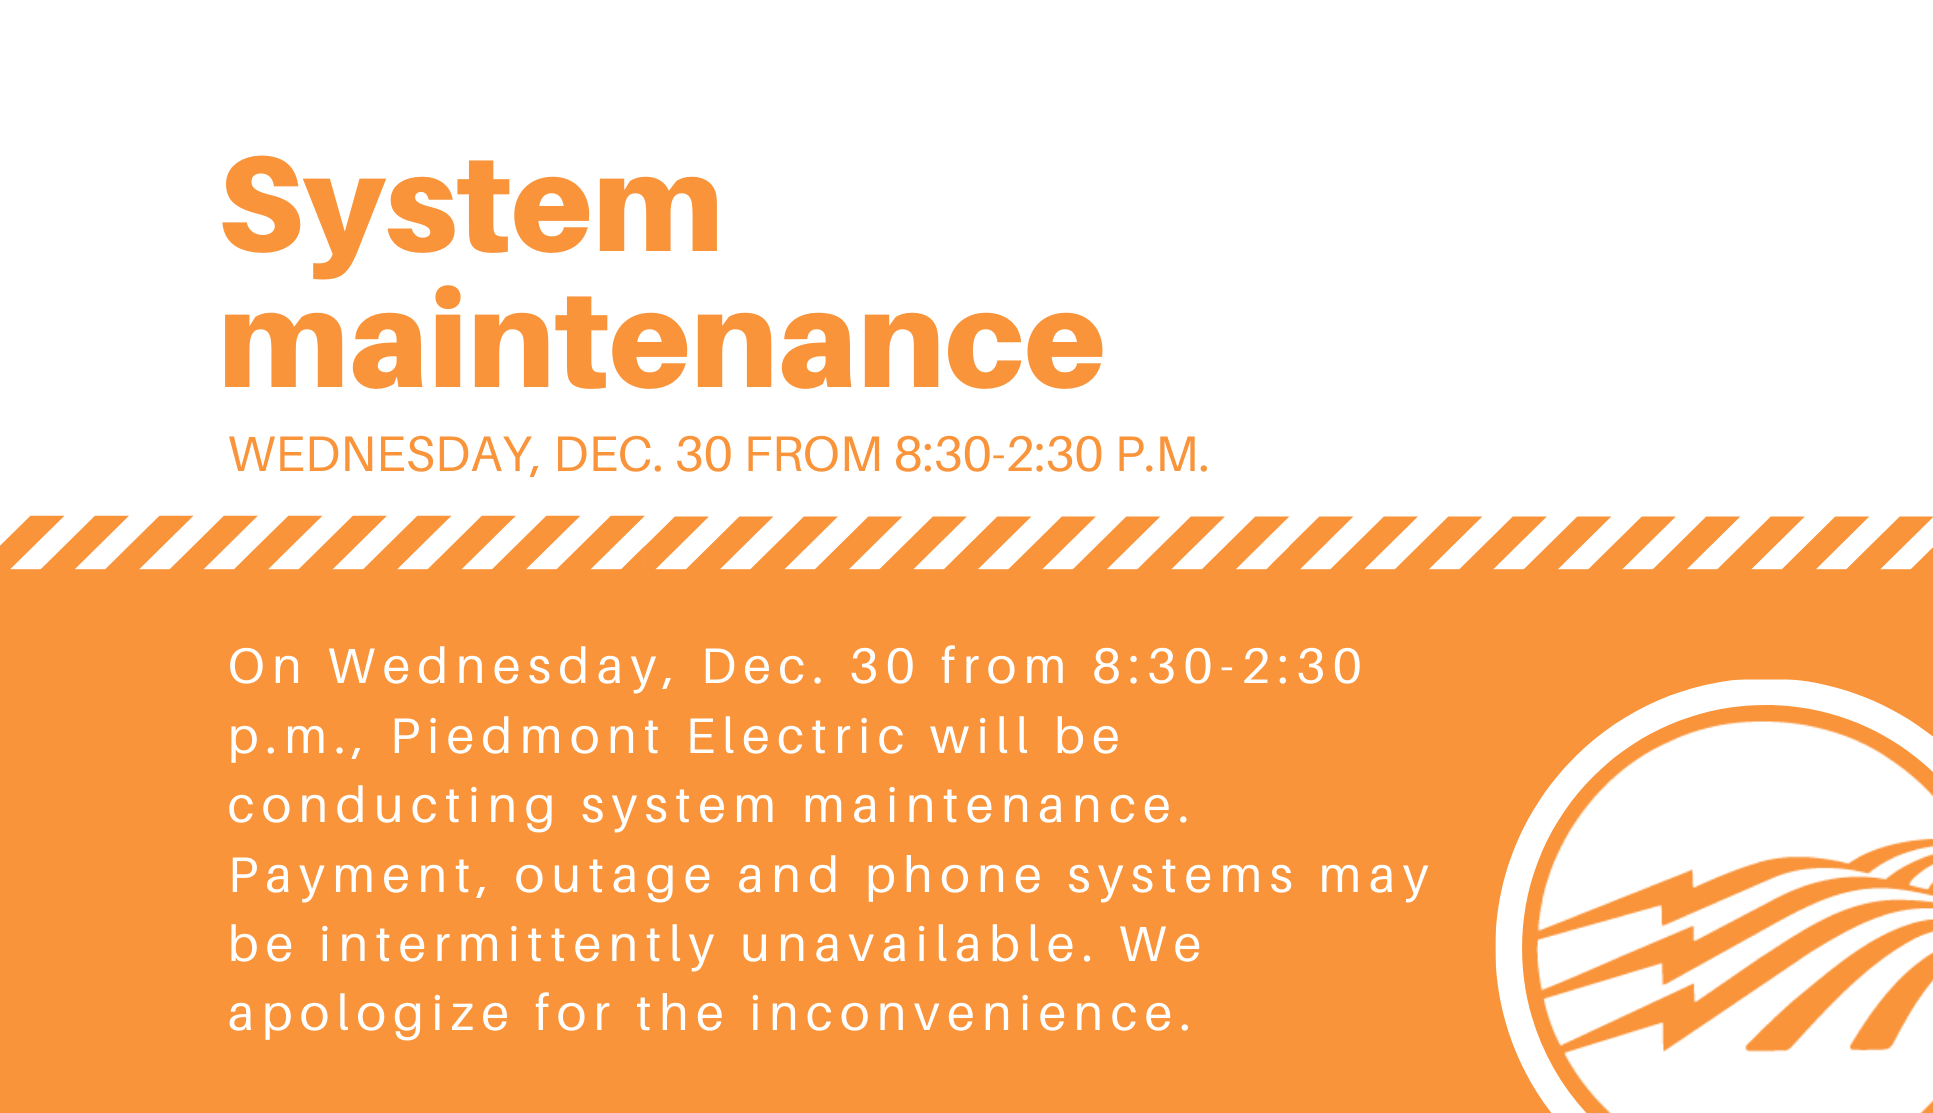 System maintenance on Dec. 30 from 8:30-2:30 p.m. Payment, outage and phone system may be temporarily unavailable. We apologize for the inconvenience.